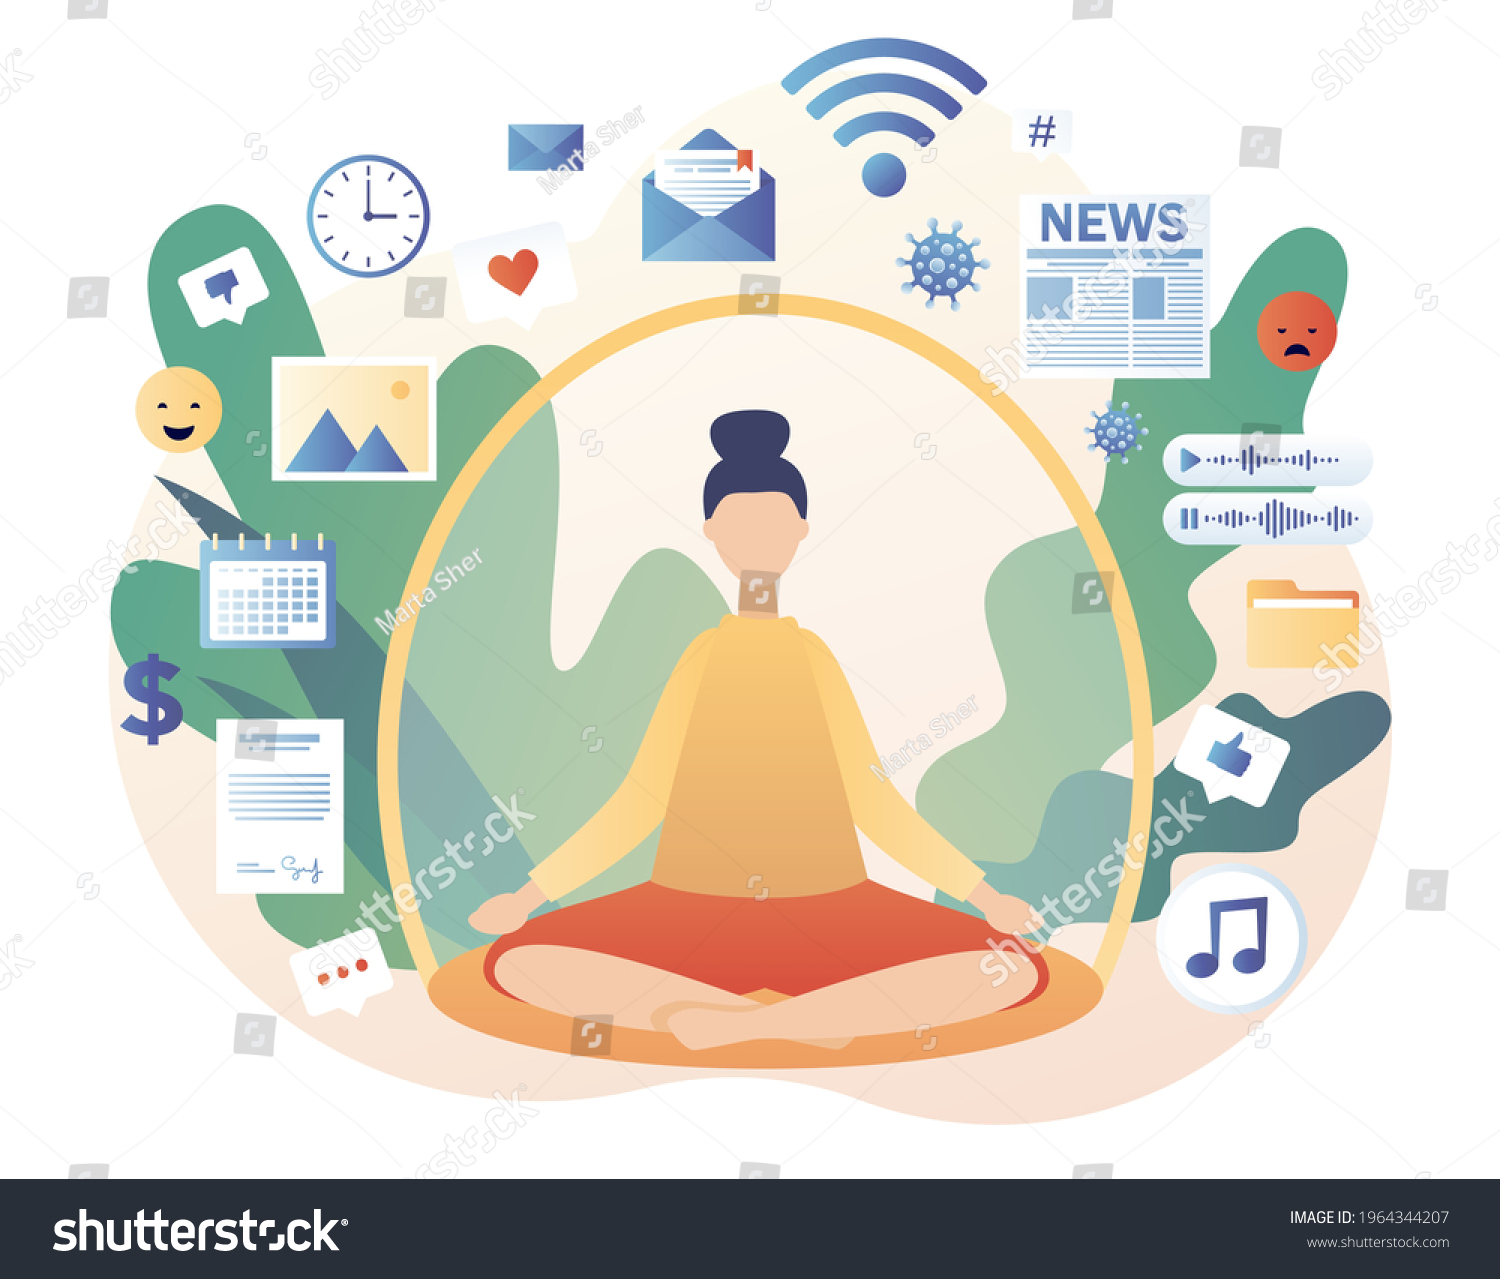 SVG of Dome filter protects woman from unnecessary information. Information detox. Digital detox. Information overload concept.  Meditation. Modern flat cartoon style. Vector illustration on white background svg